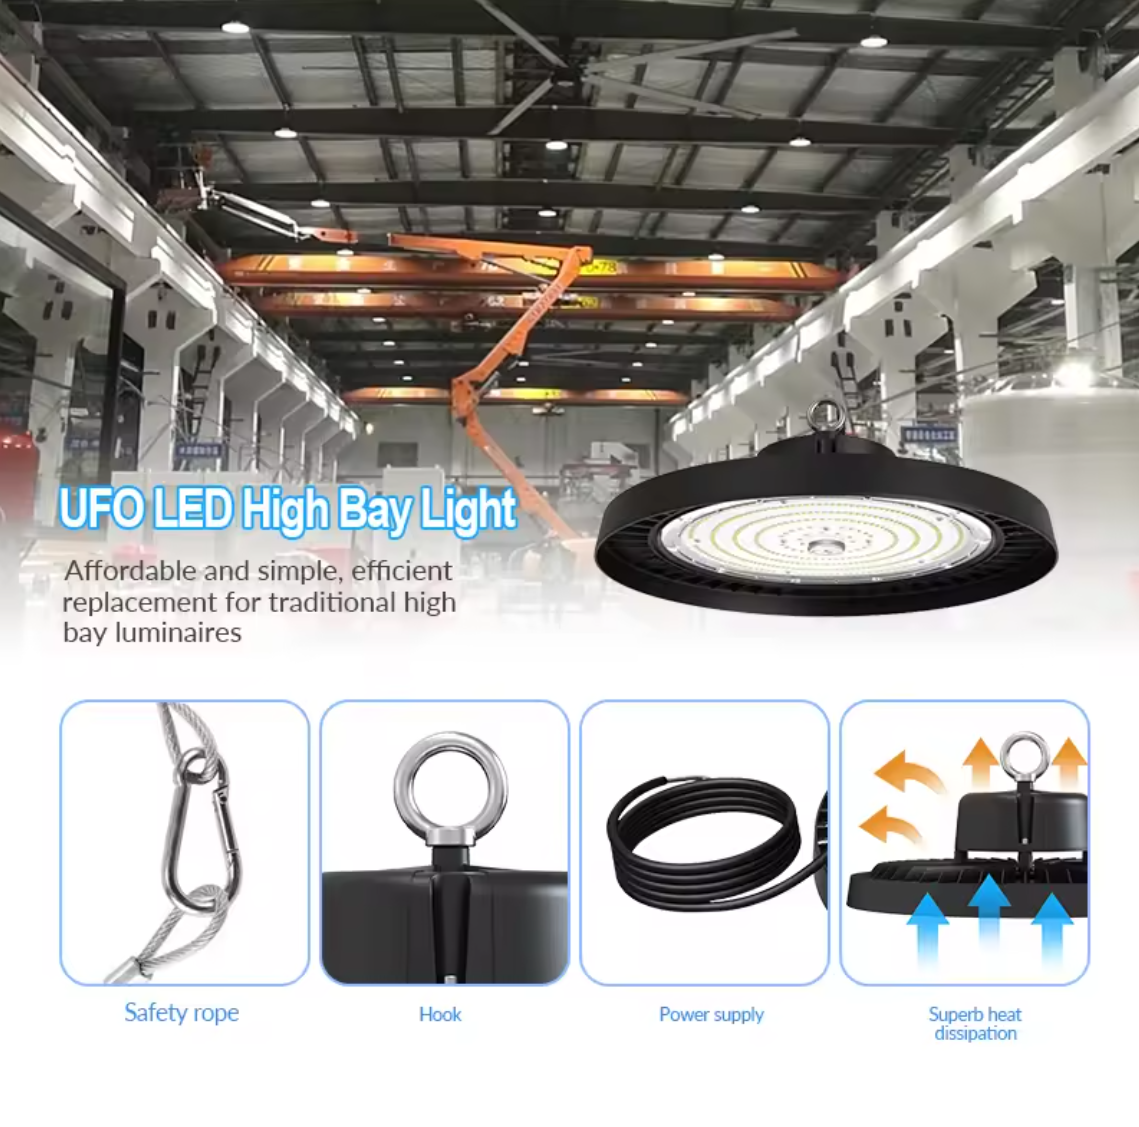 ufo led high bay light pictures